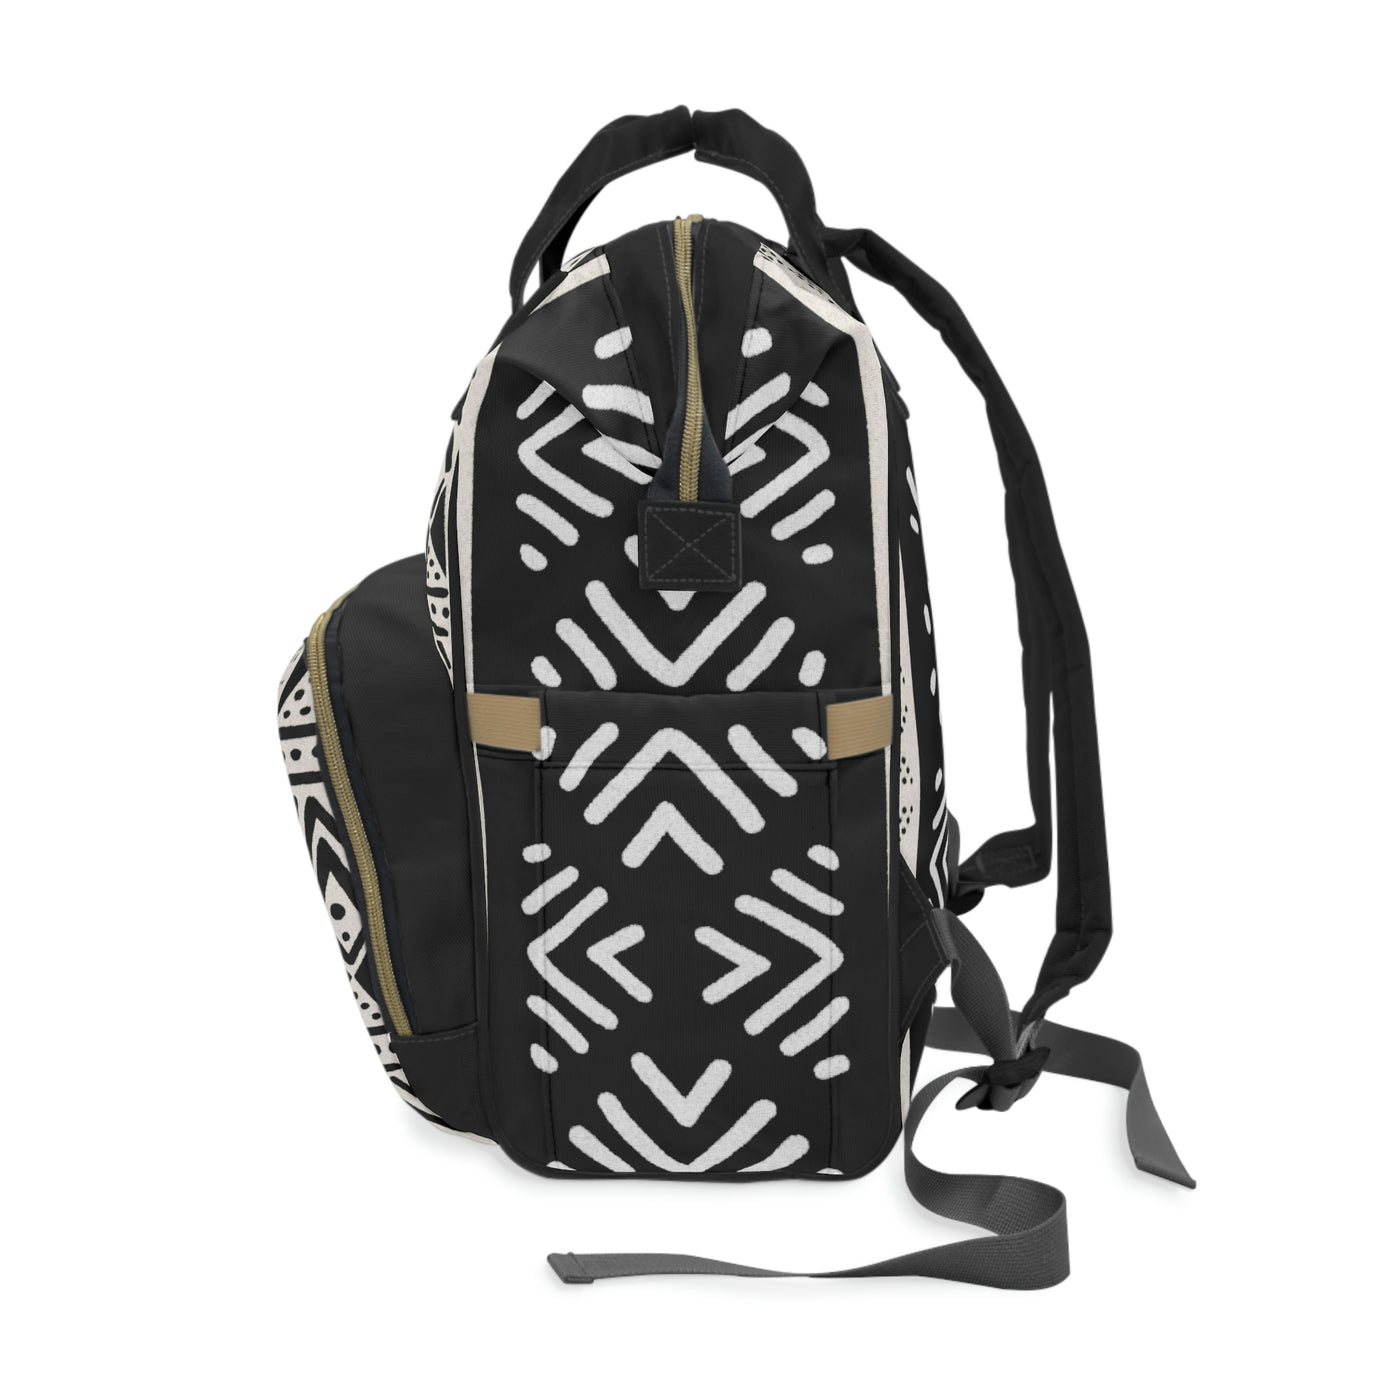 Mudcloth Pattern Mixed white Diaper Bag